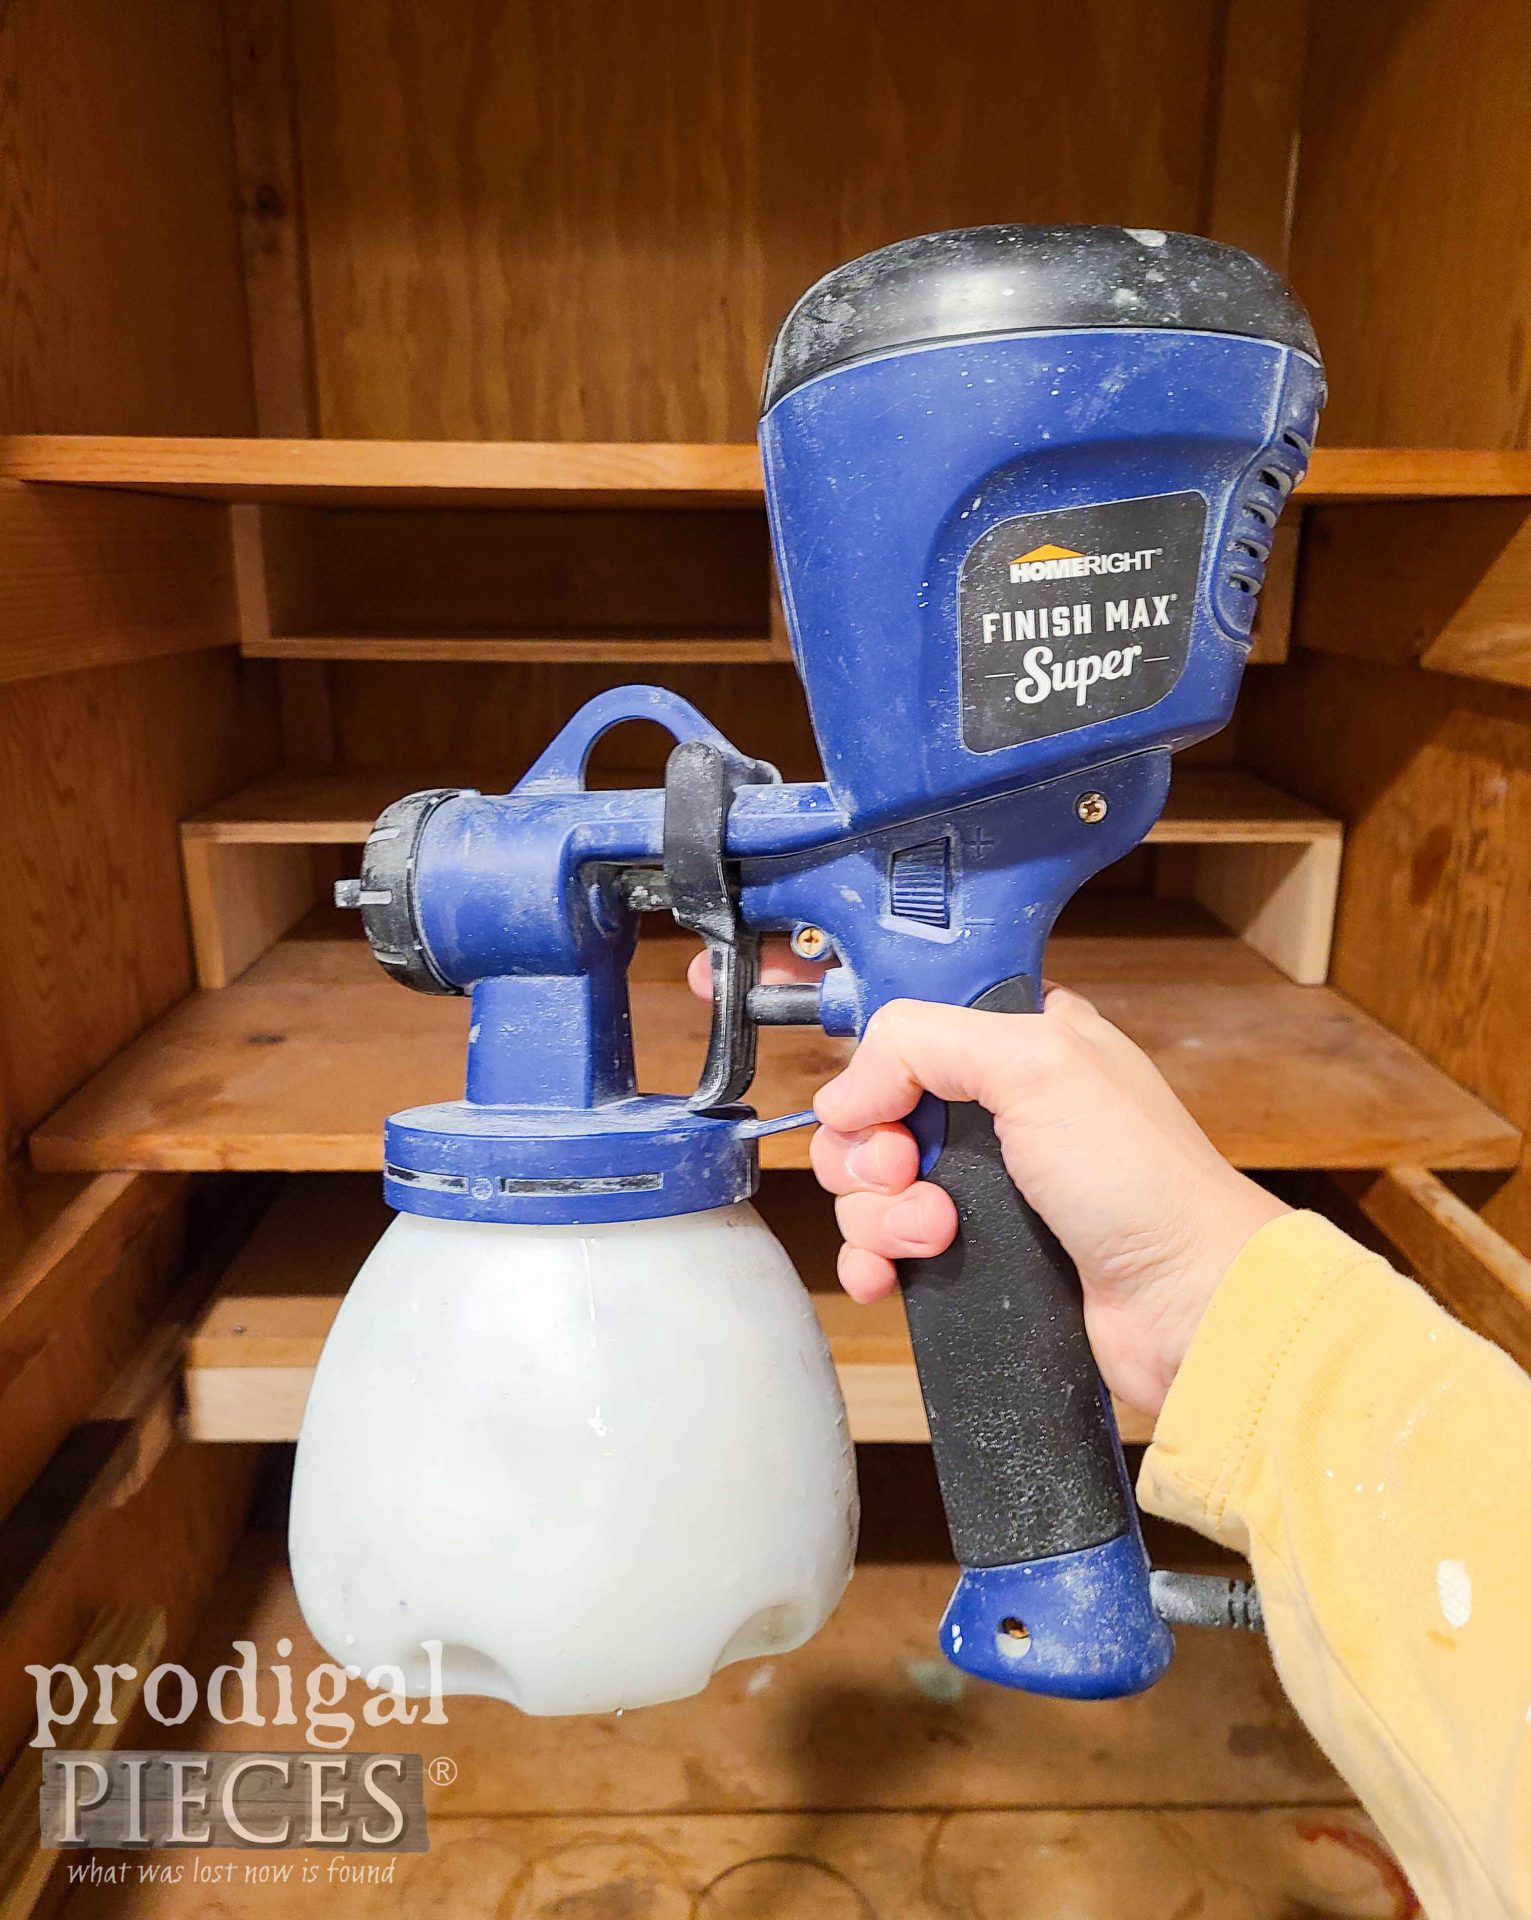 HomeRight Super Finish Max Extra Sprayer for Closet Update by Larissa of Prodigal Pieces | prodigalpieces.com #prodigalpieces